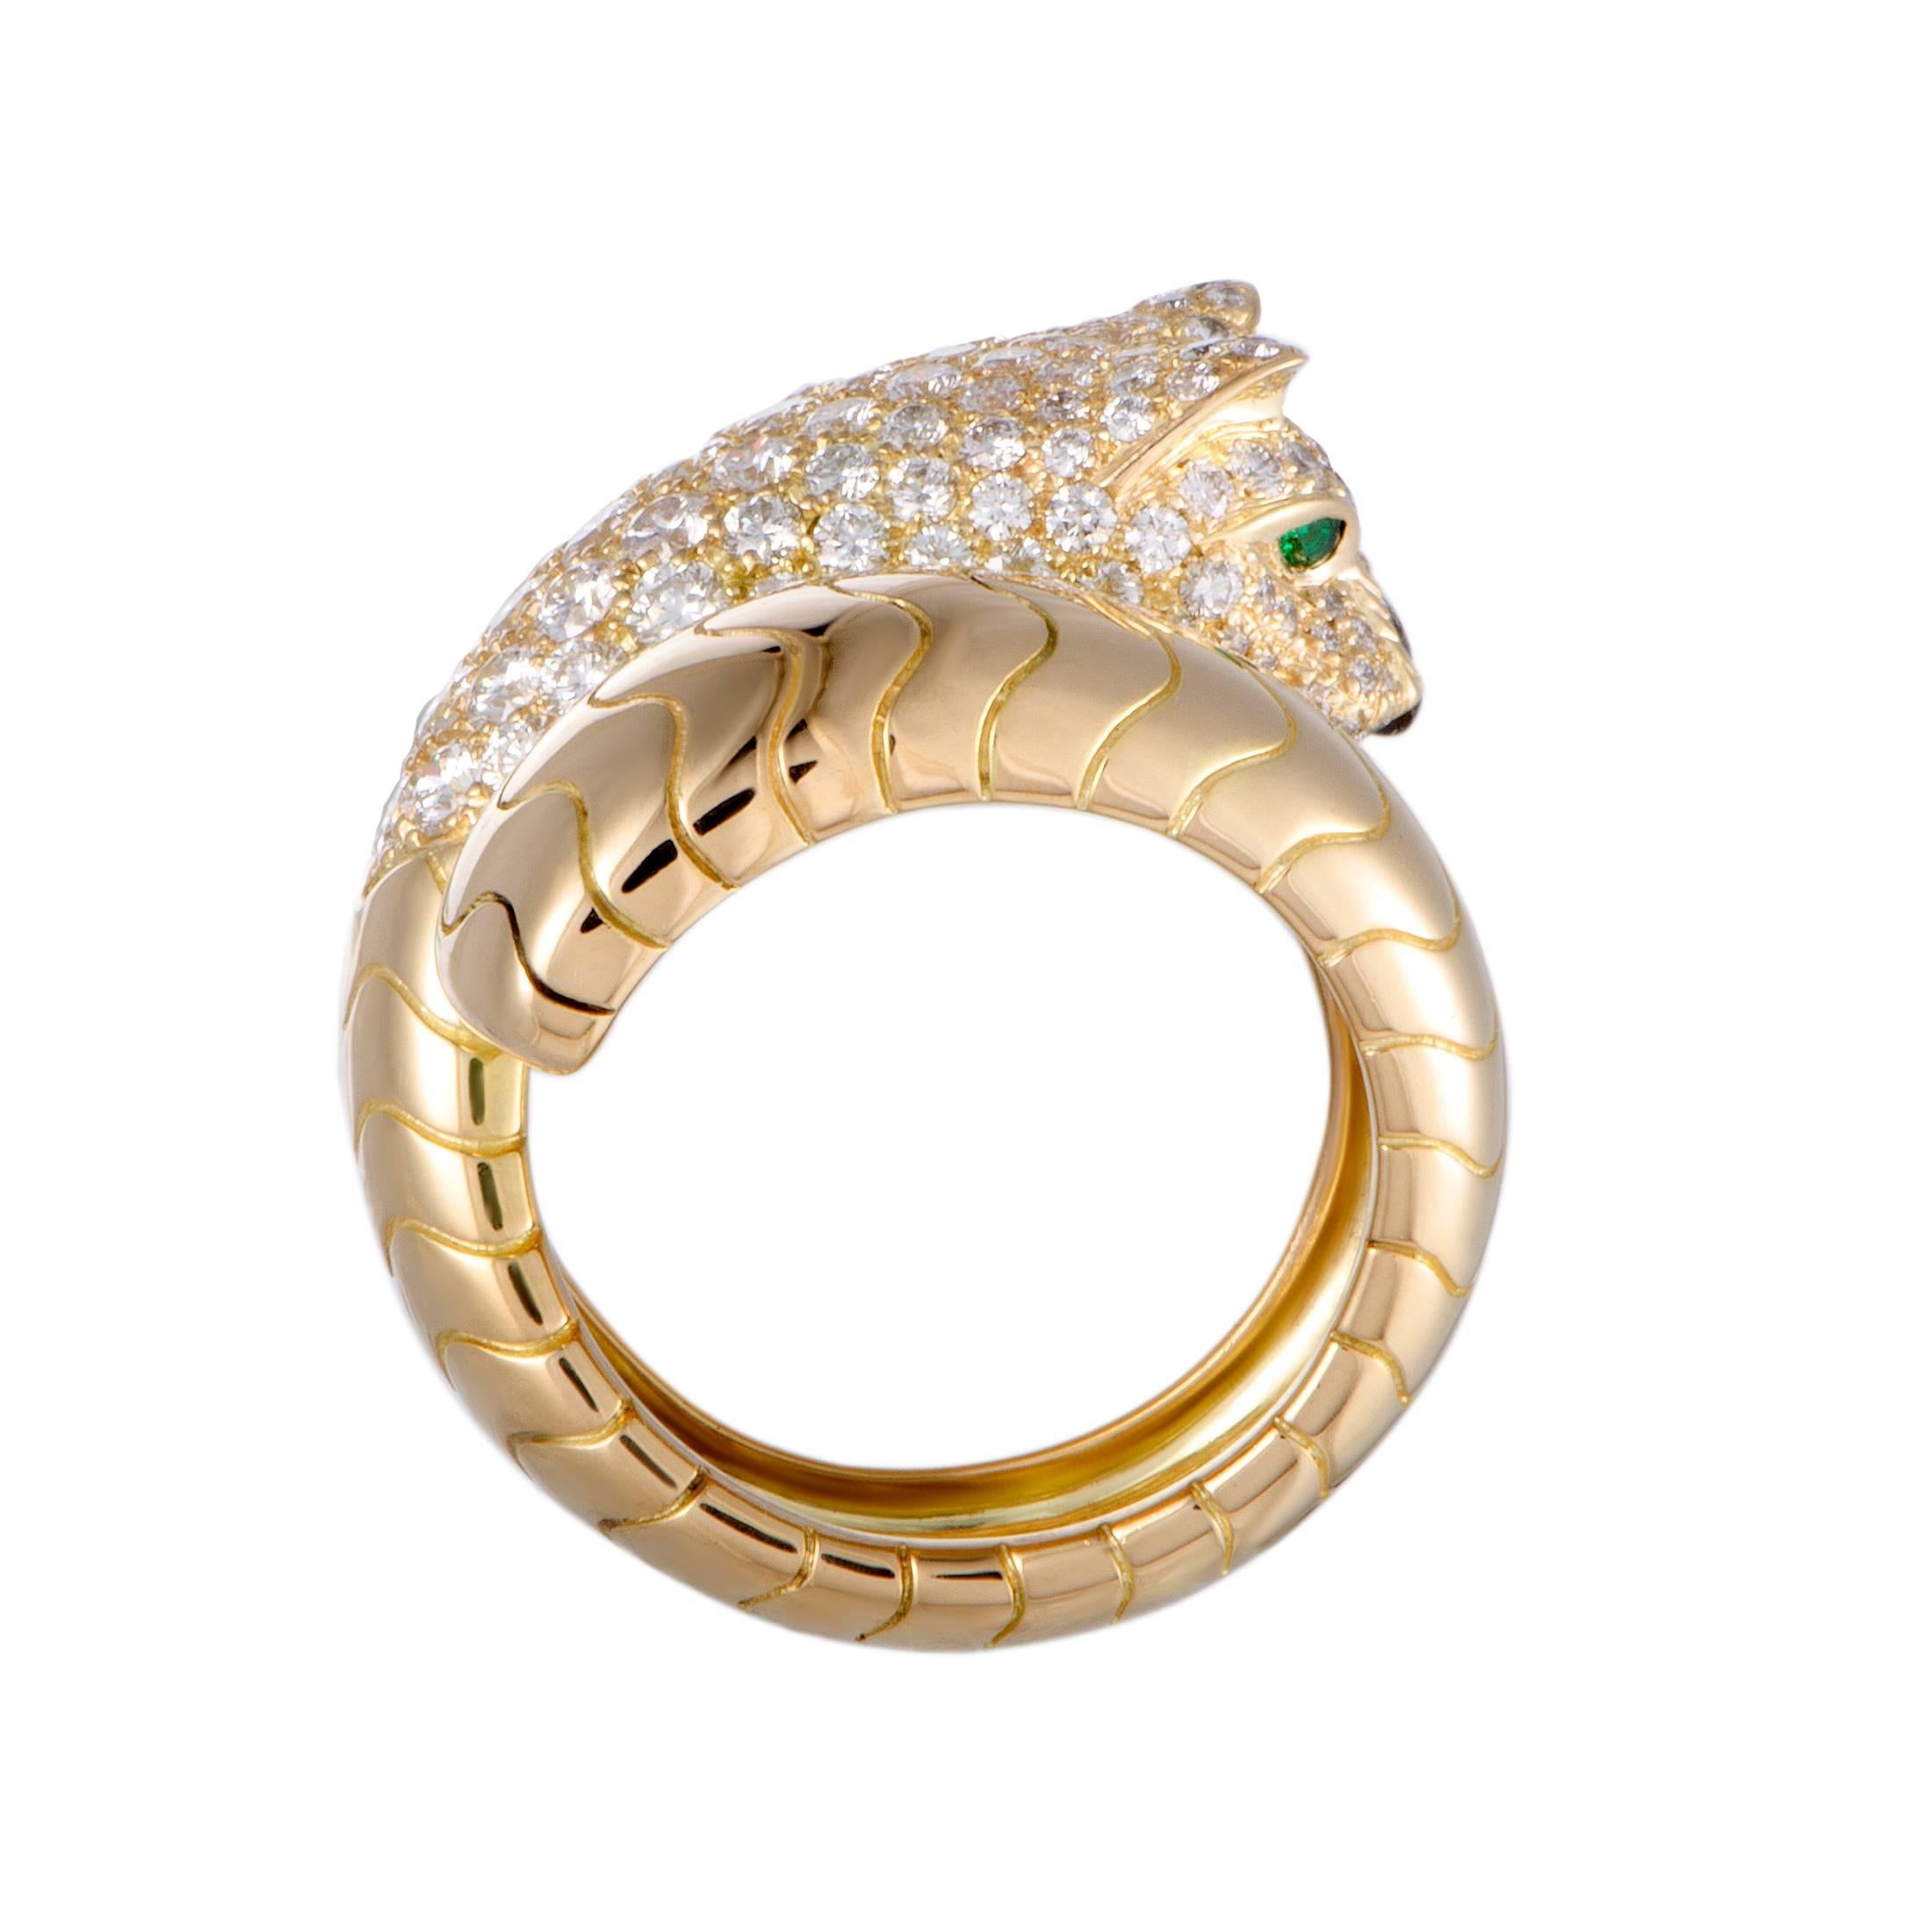 Depicting a panther in a fabulously luxurious manner, this stunning Cartier ring offers an incredibly eye-catching appearance. The ring is crafted from 18K yellow gold and embellished with onyx, emerald, and diamond stones.

Ring Size: 6.5
Band